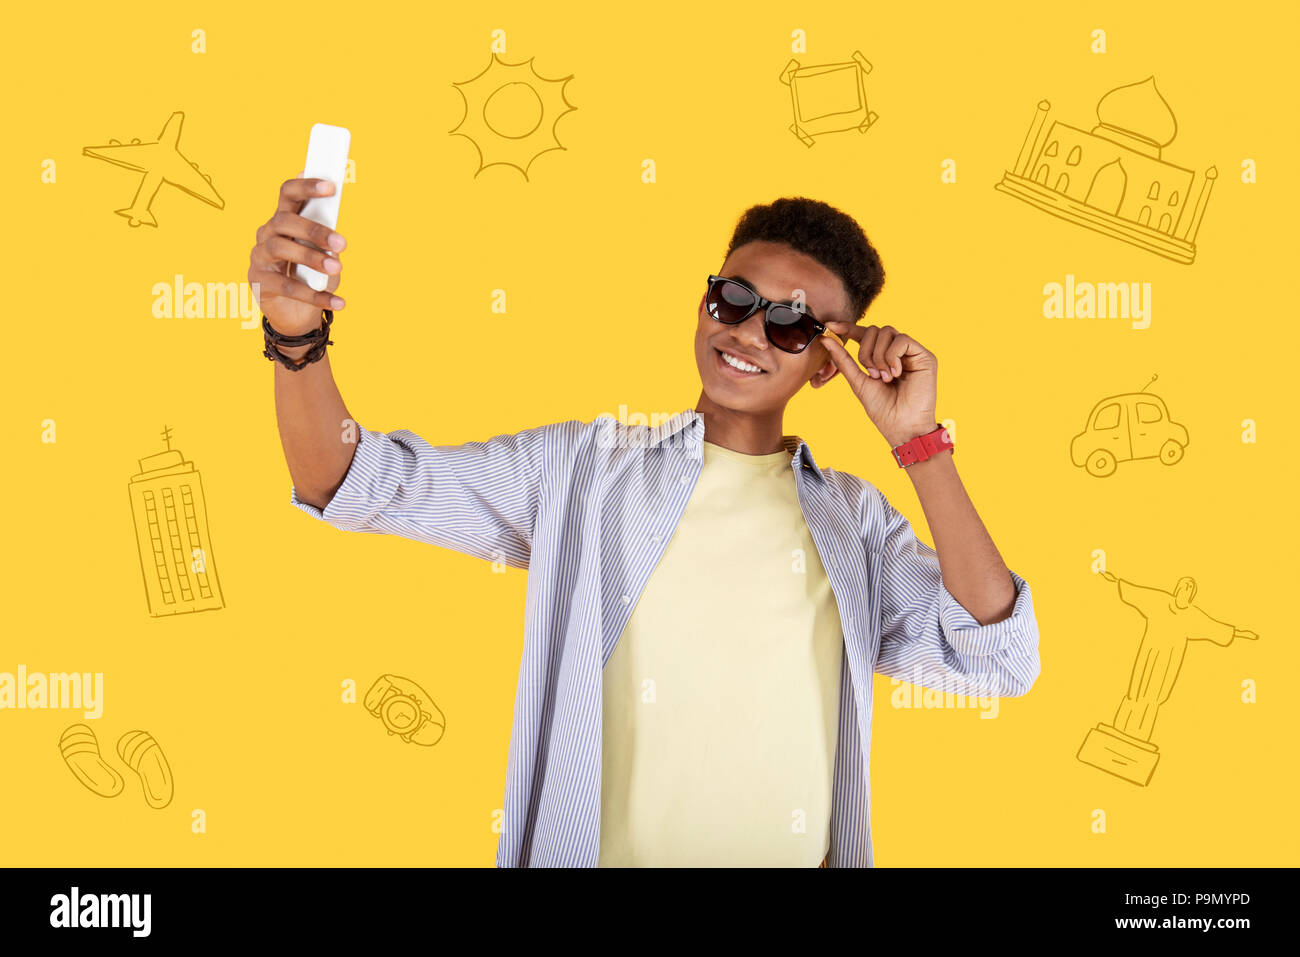 Relaxed student touching his sunglasses while taking a selfie Stock Photo